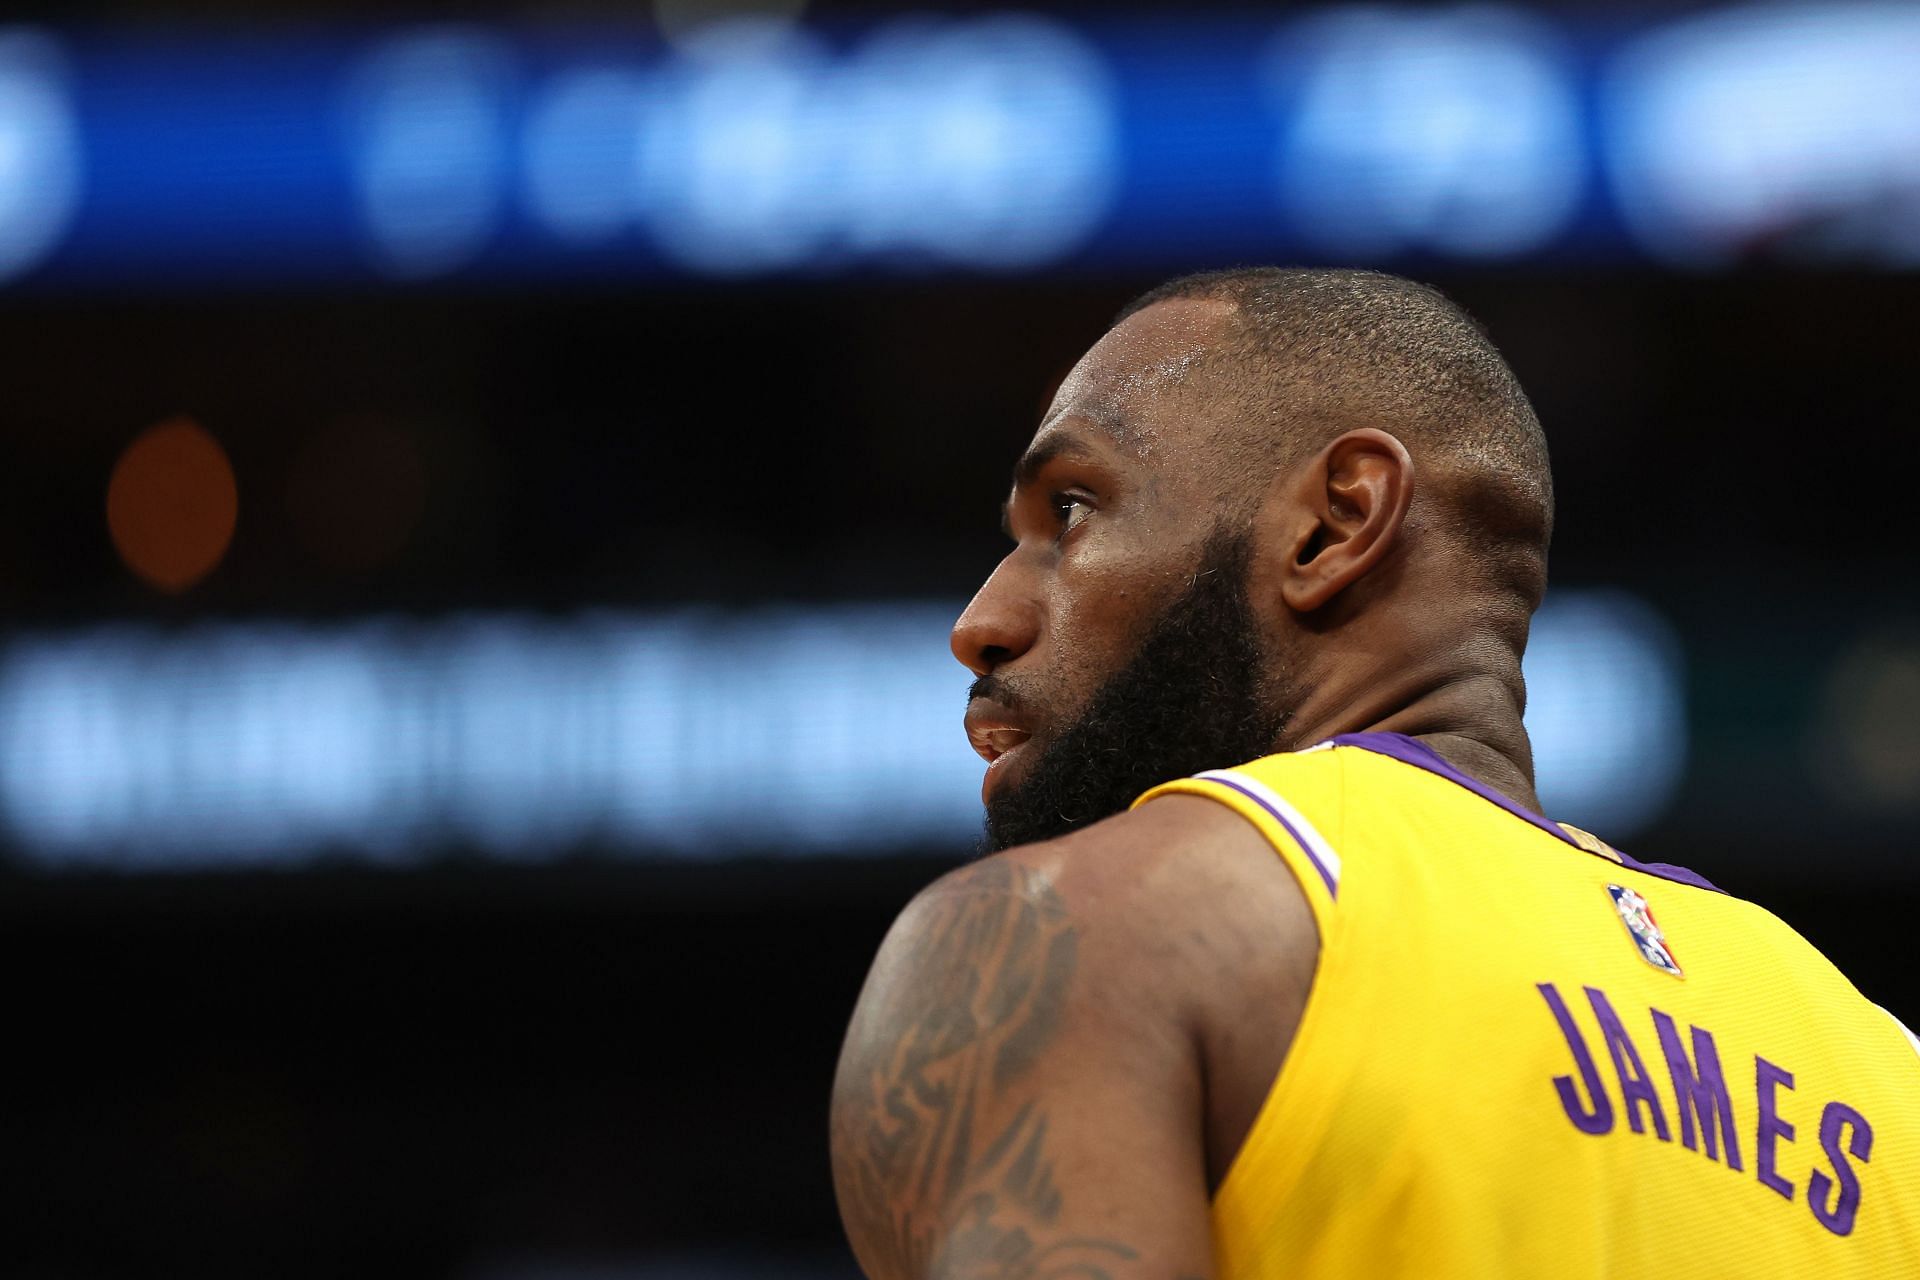 LA Lakers forward LeBron James with praise from new coach Darvin Ham